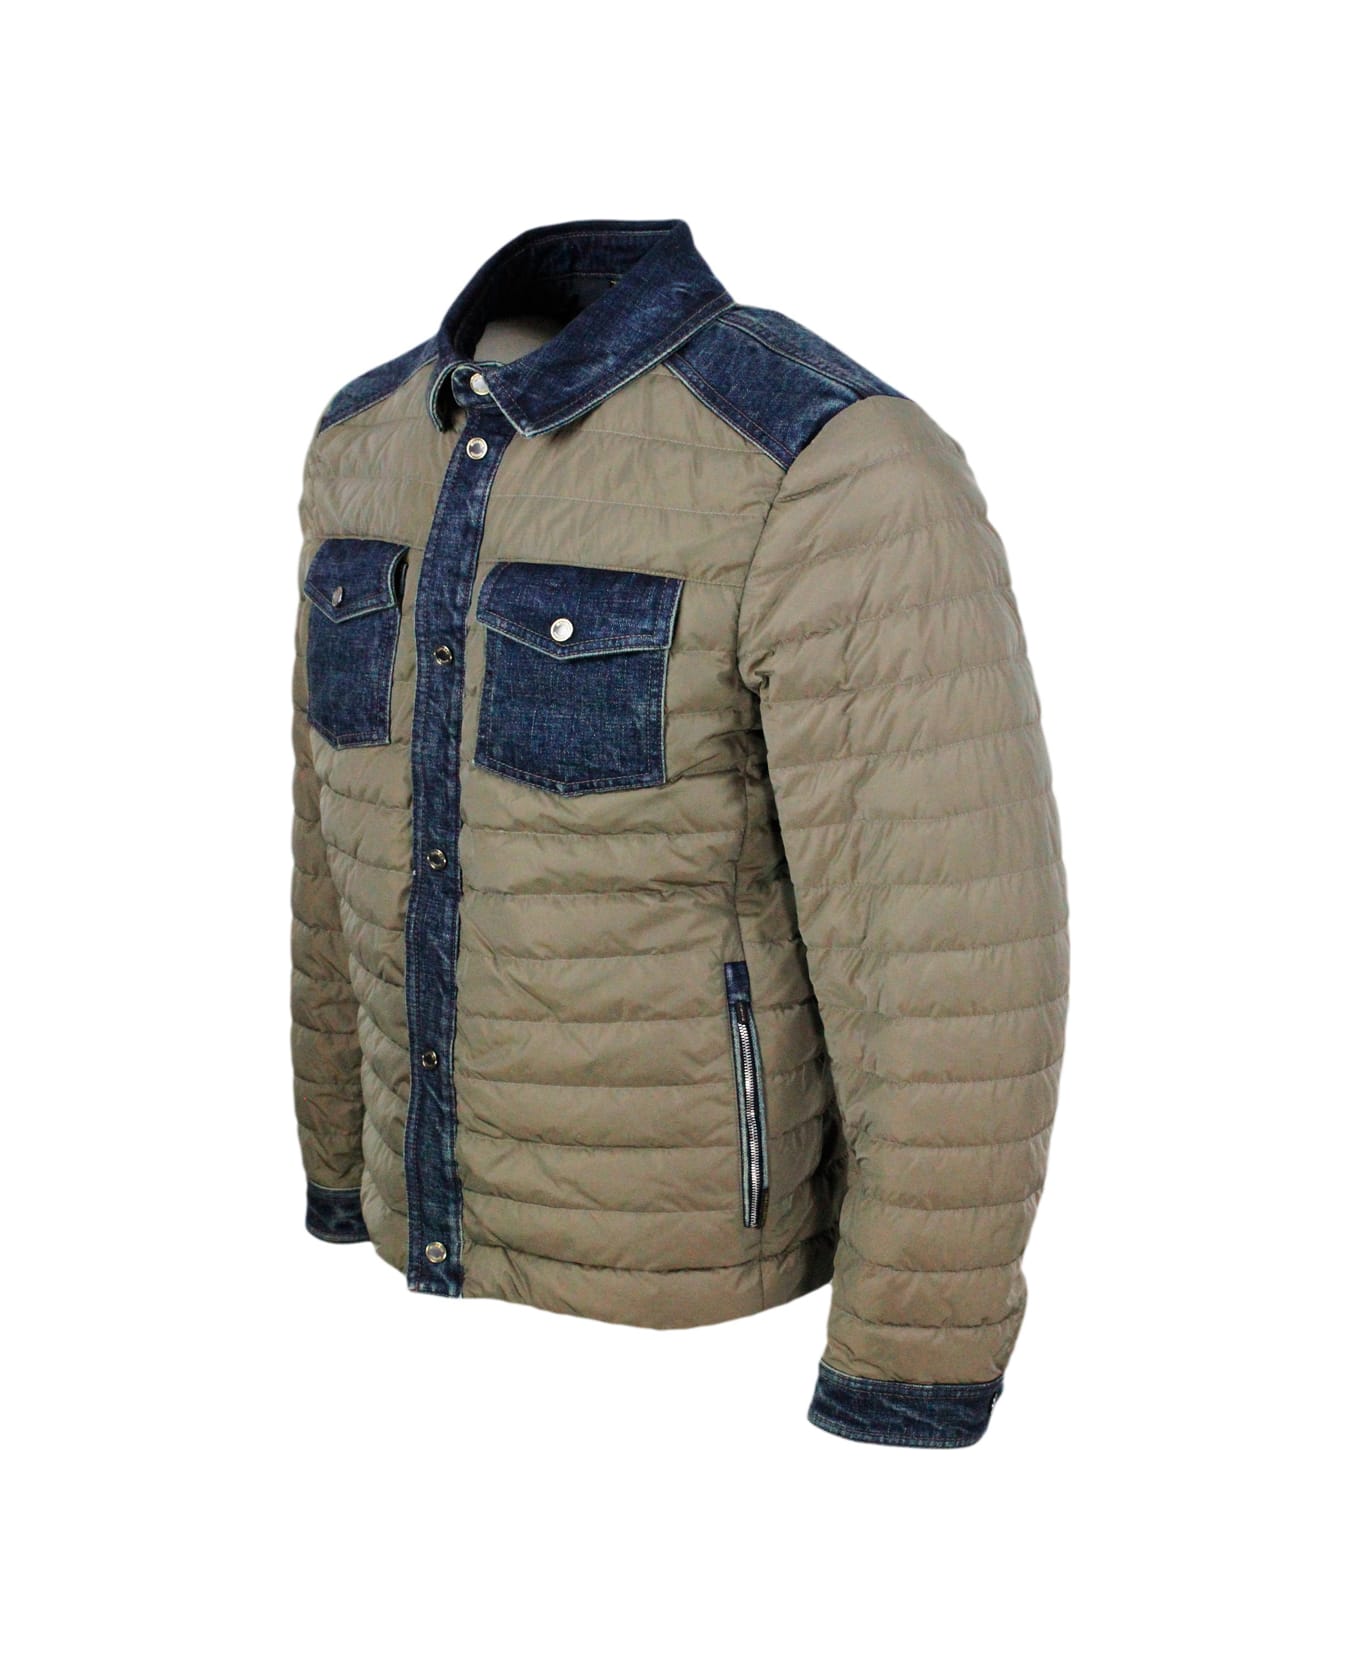 Moorer 100 Gram Light Down Jacket With Denim Inserts And Details. Internal And External Side Pockets And Button Closure - Military